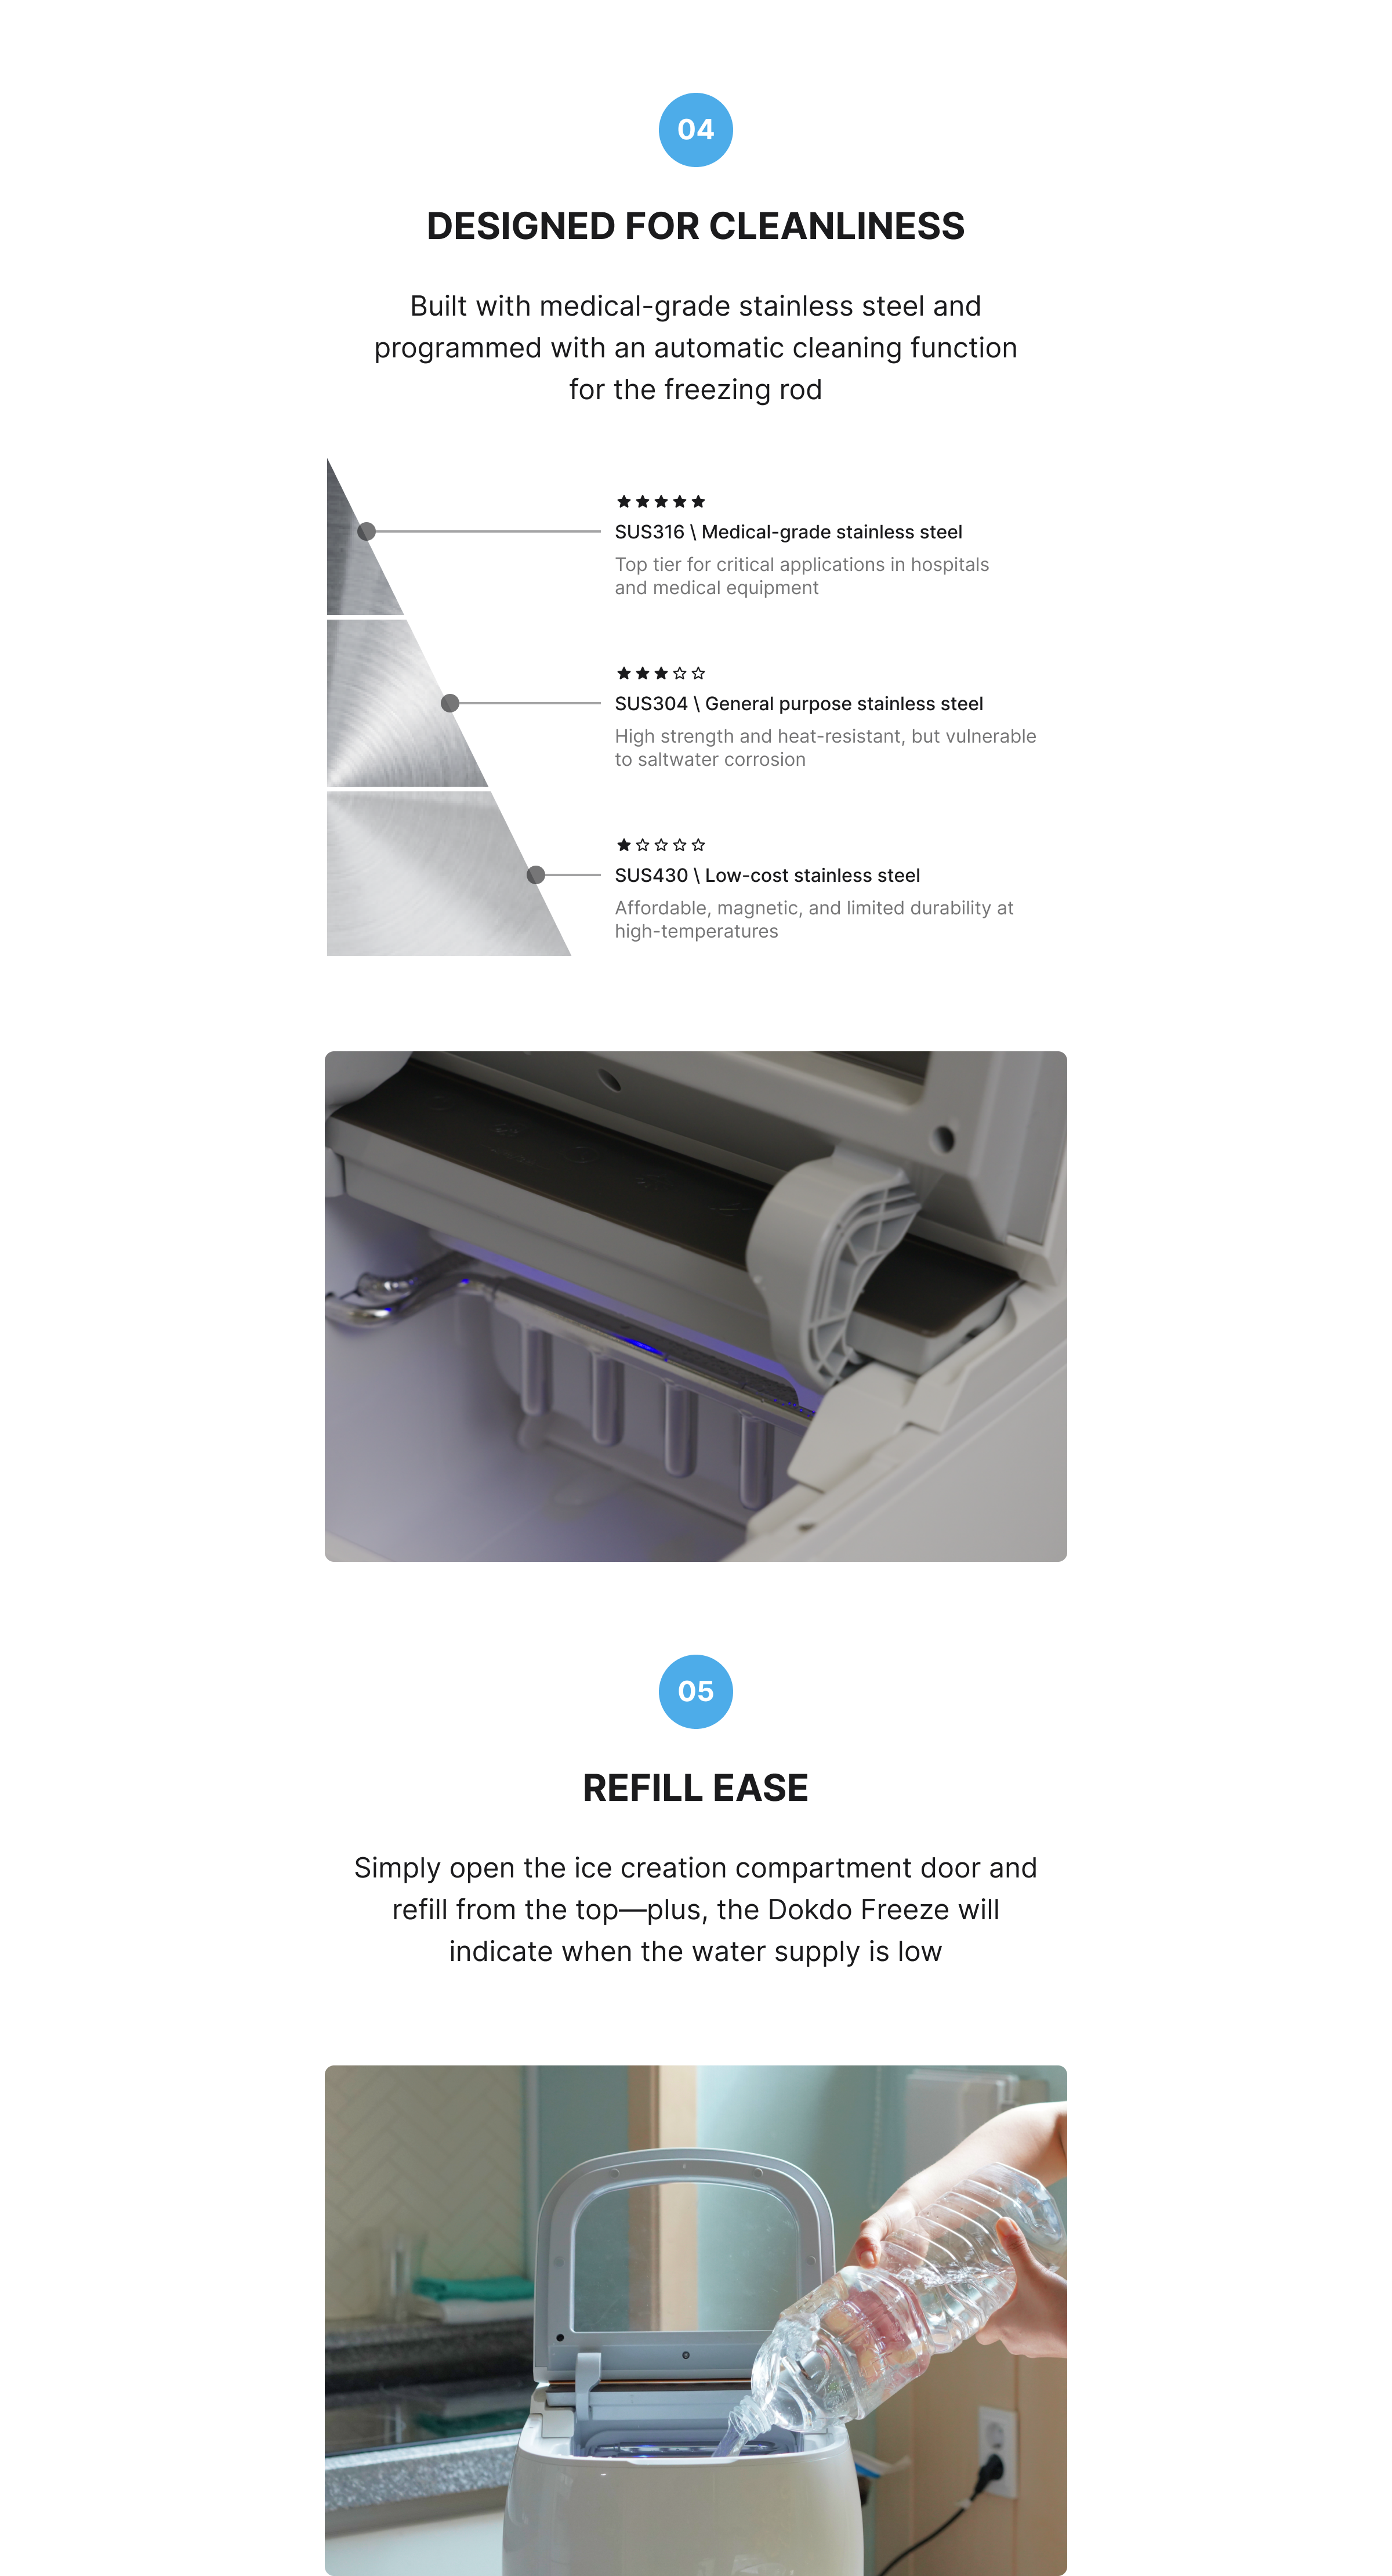 Dokdo Freeze product description image describing how the ice maker is built with top-tier and rust-free medical grade stainless steel and the top-refill system is super easy to use